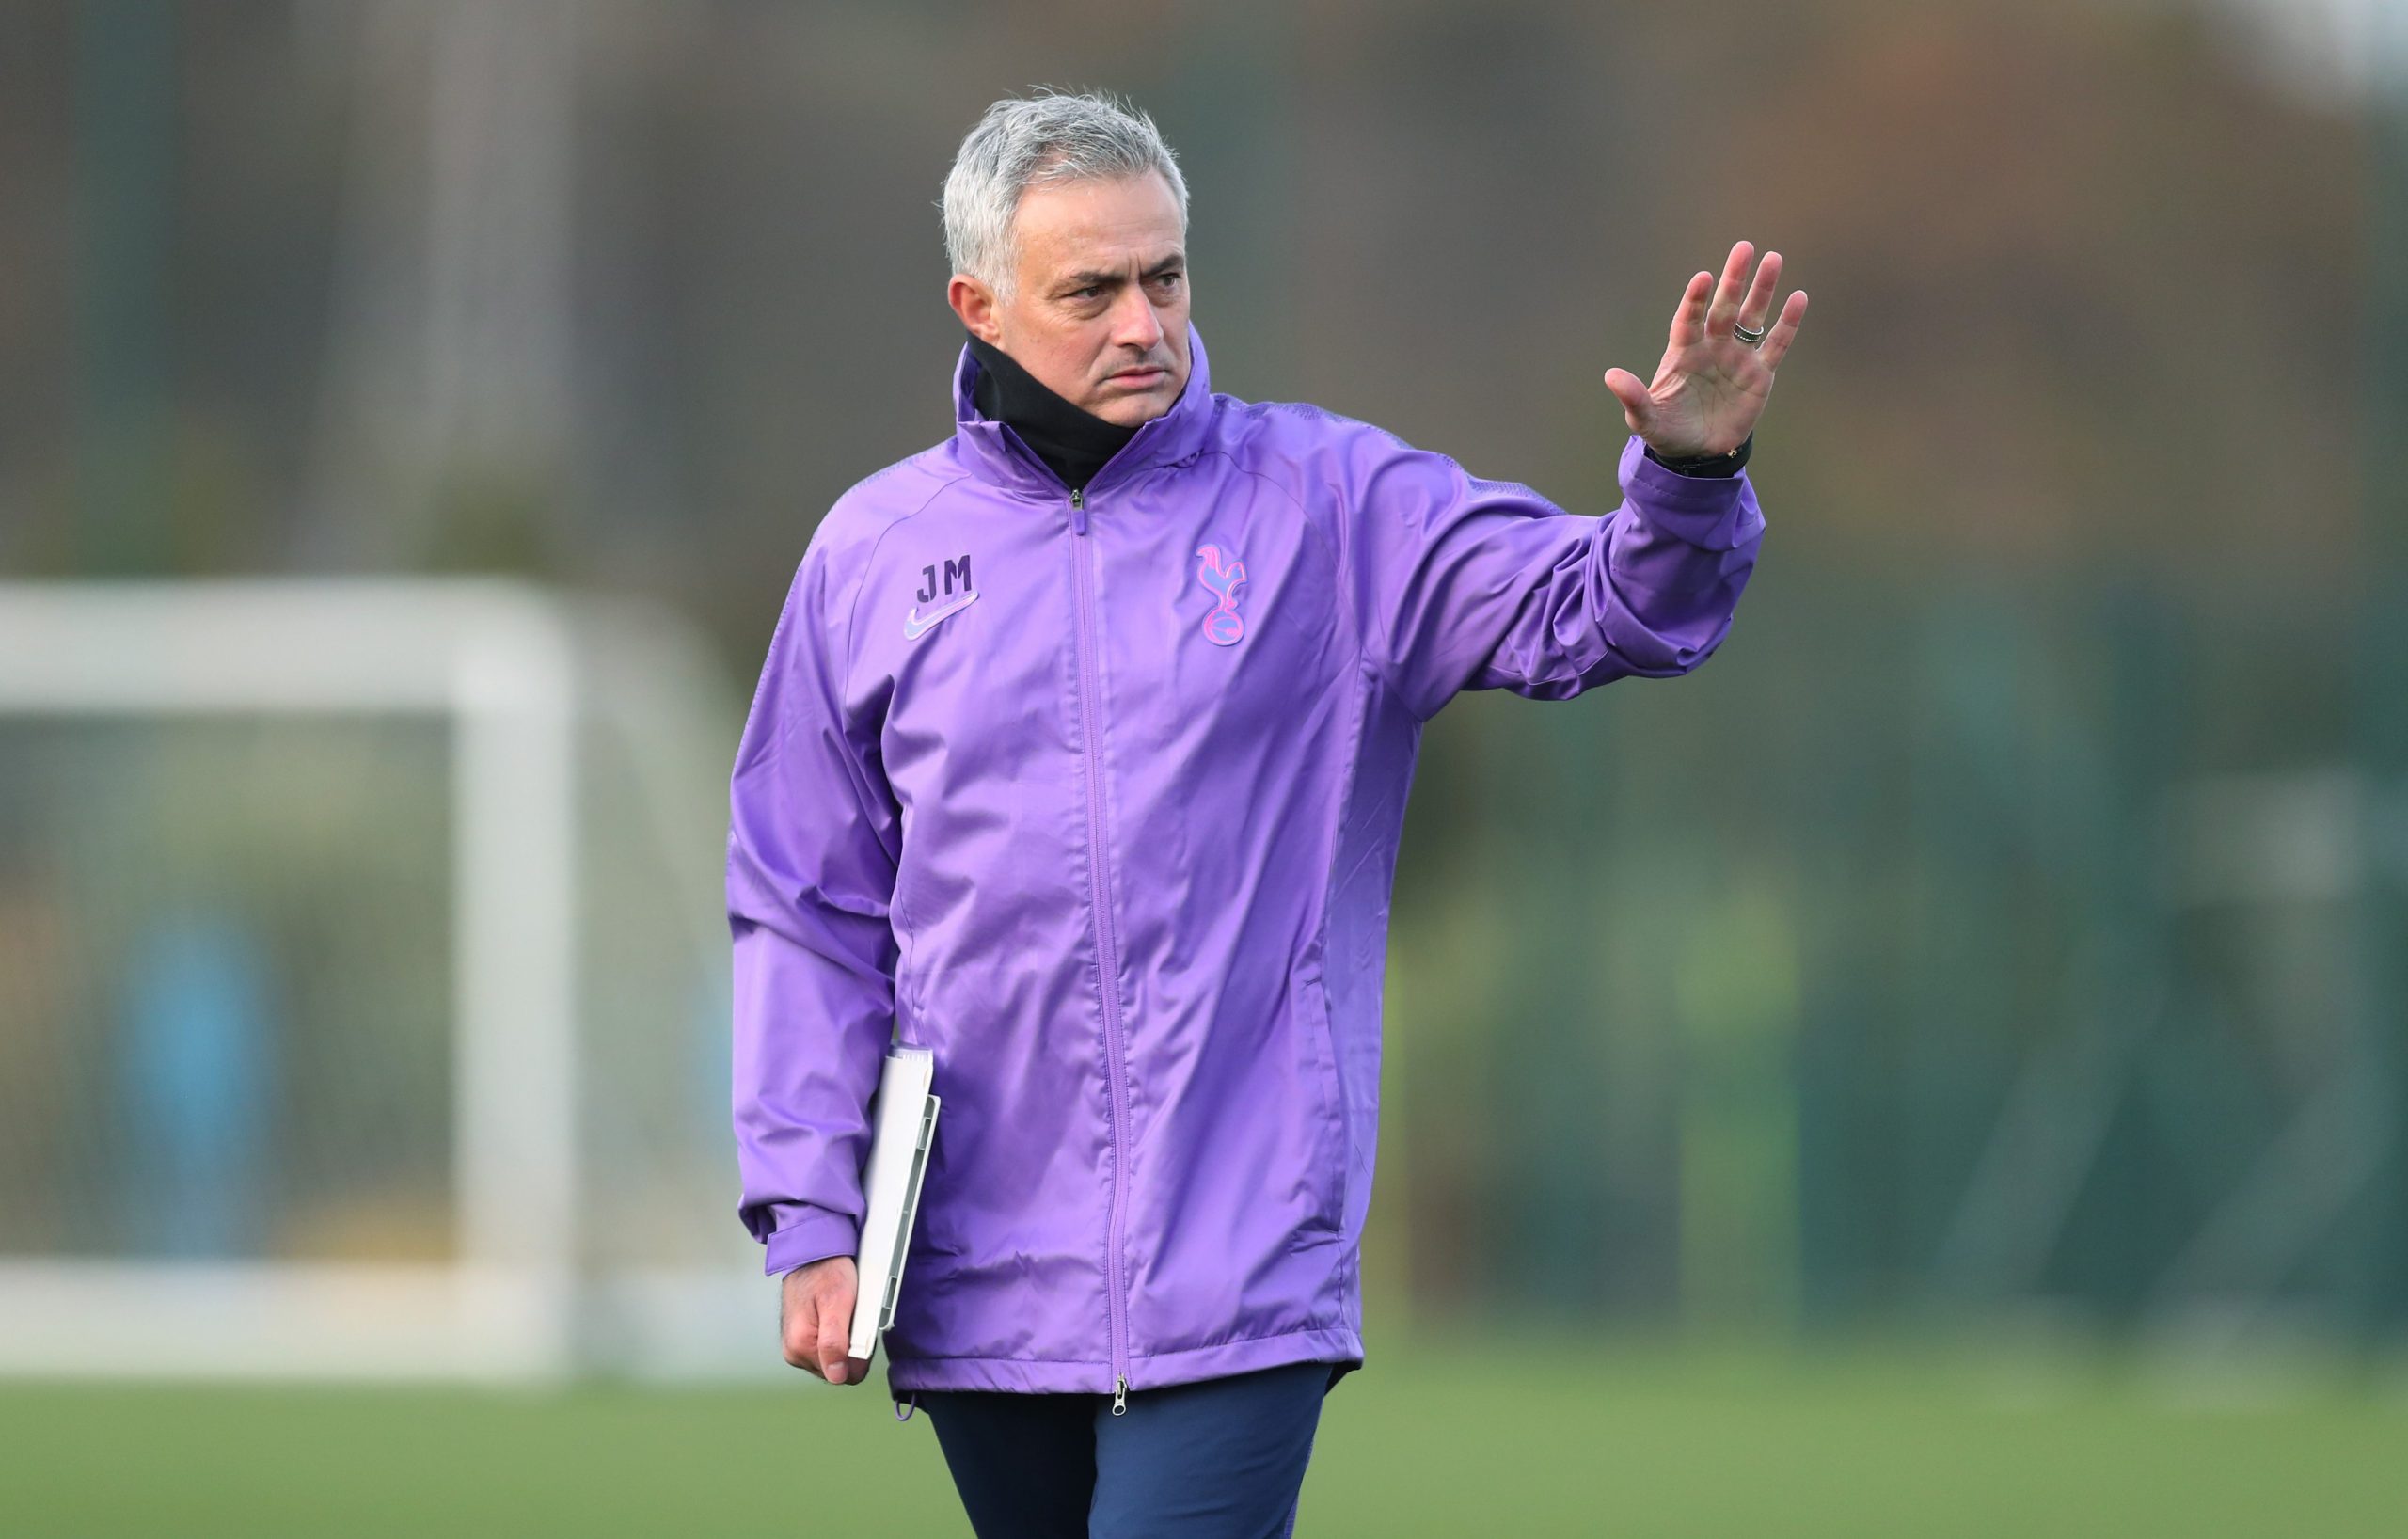 Tottenham Reacts After Mourinho, Players Seen Training